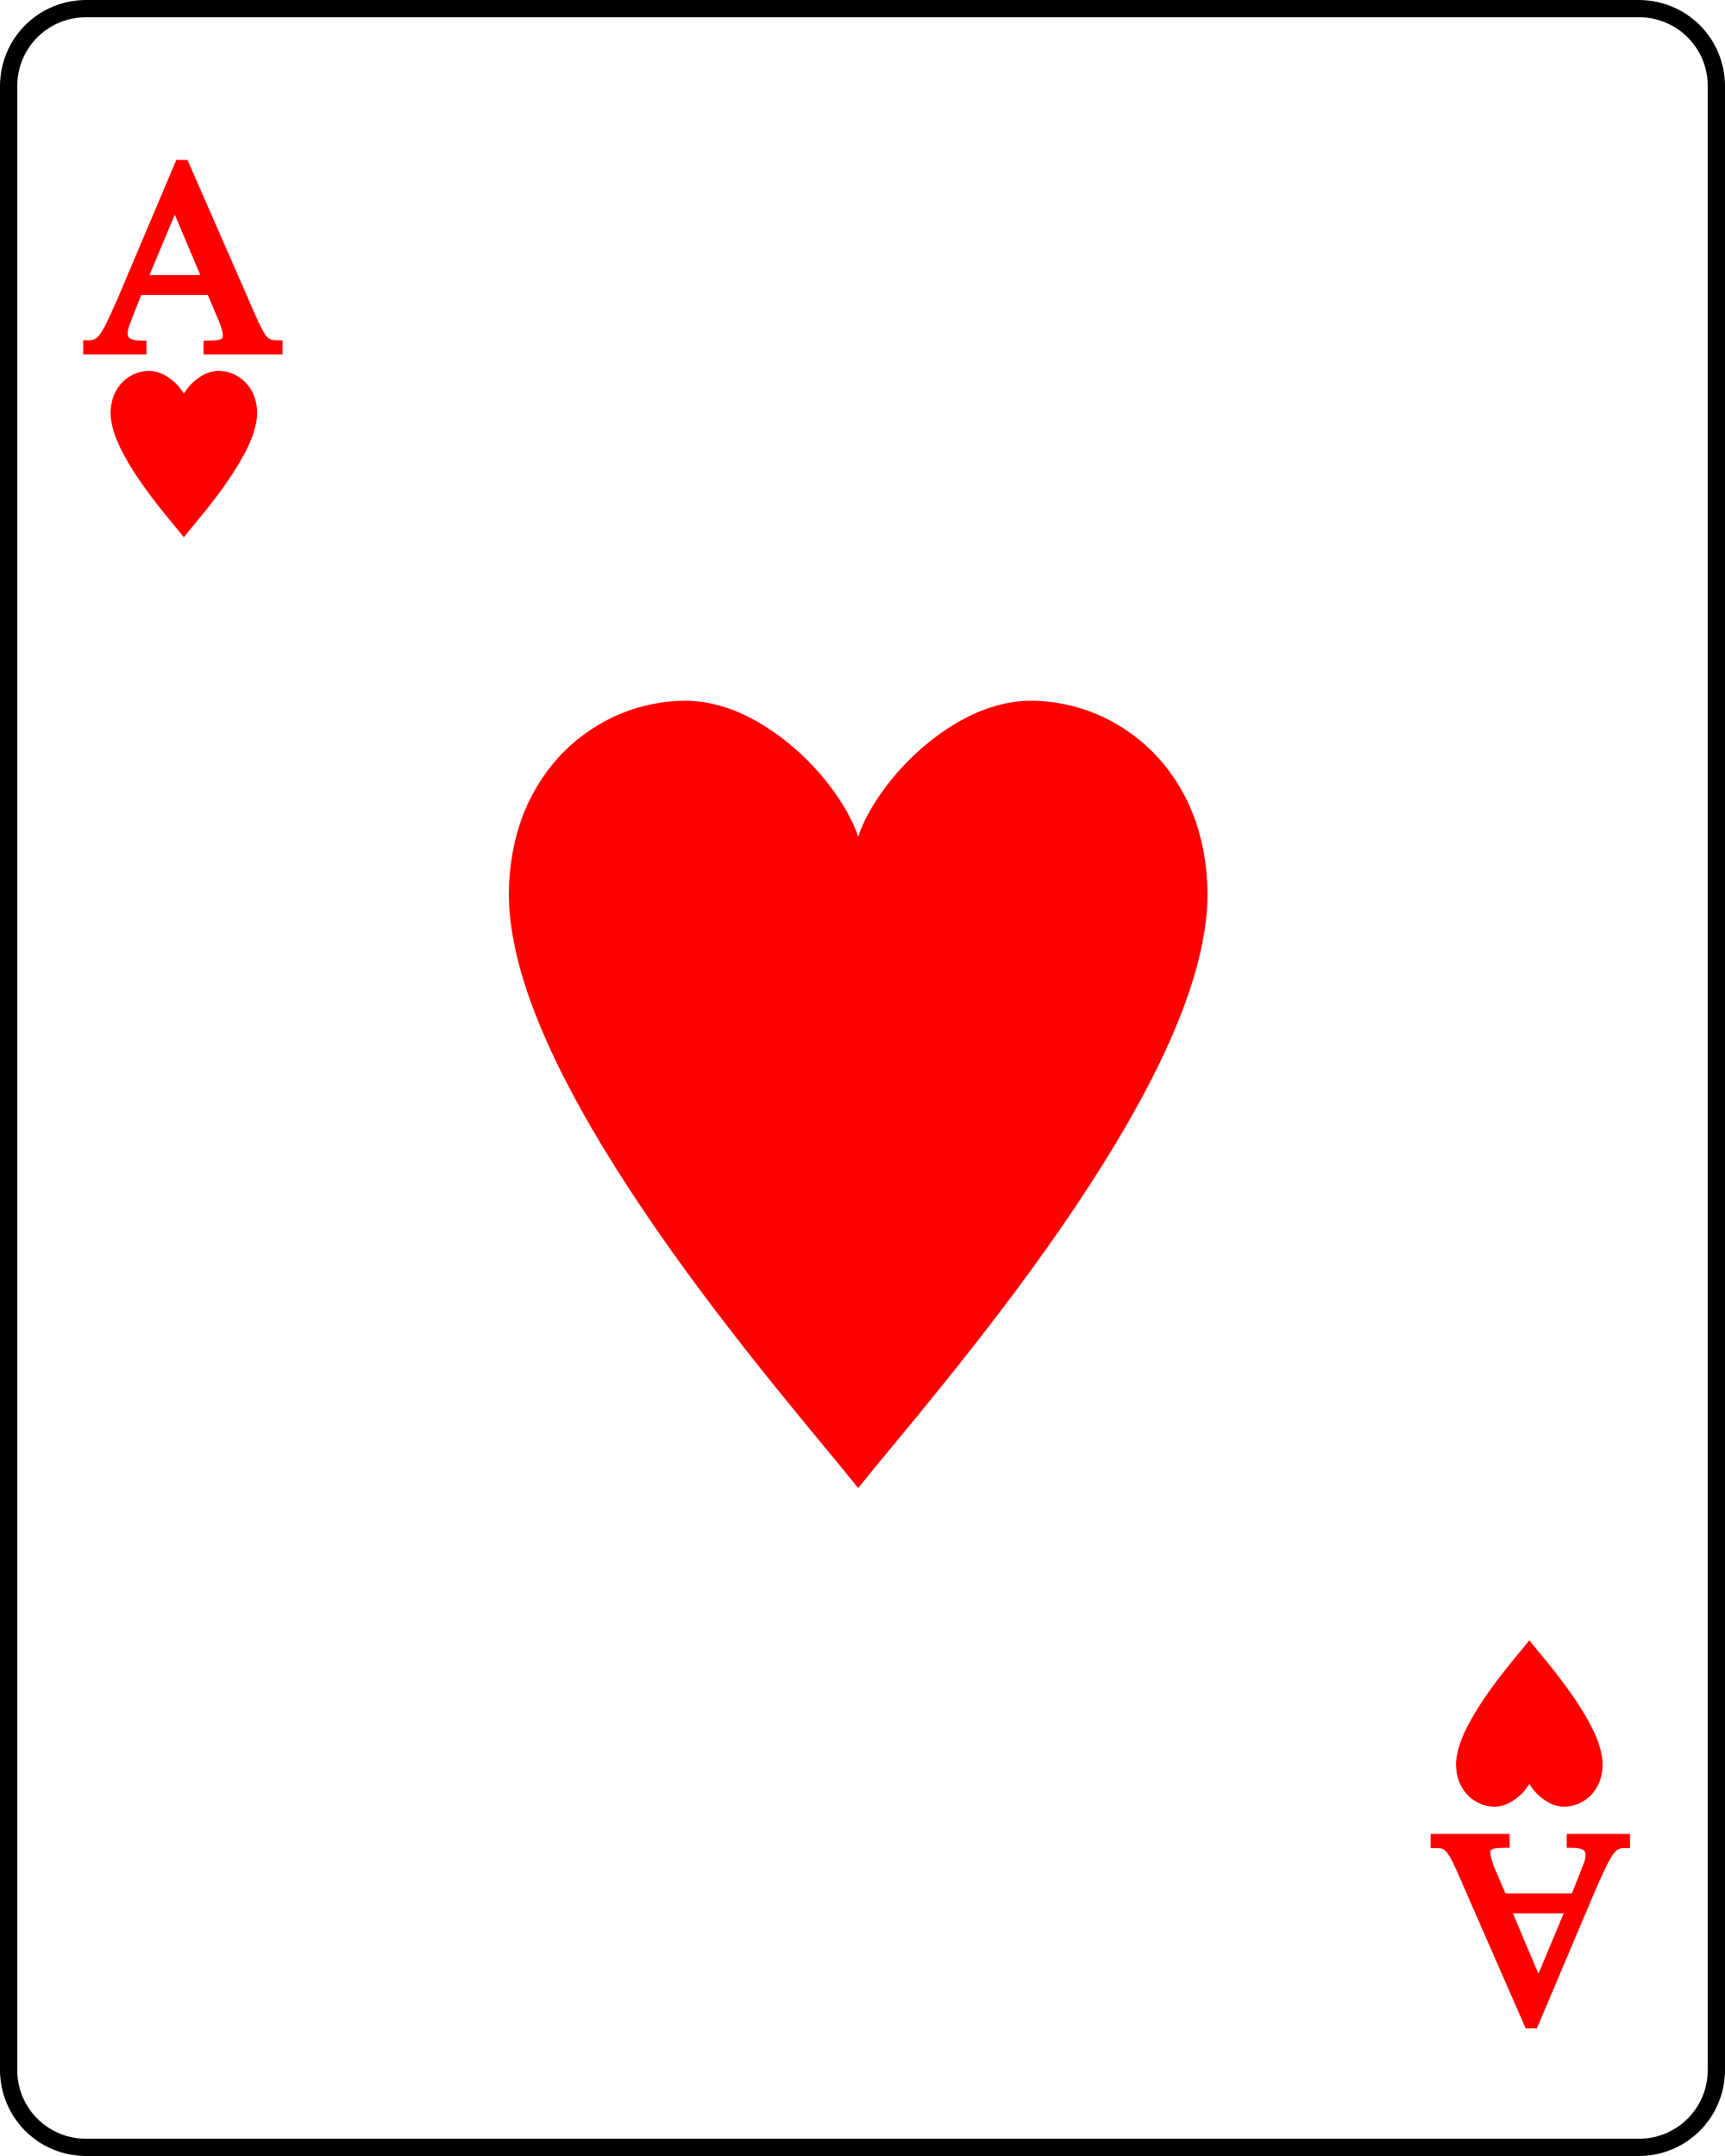 File:Playing card heart A.svg